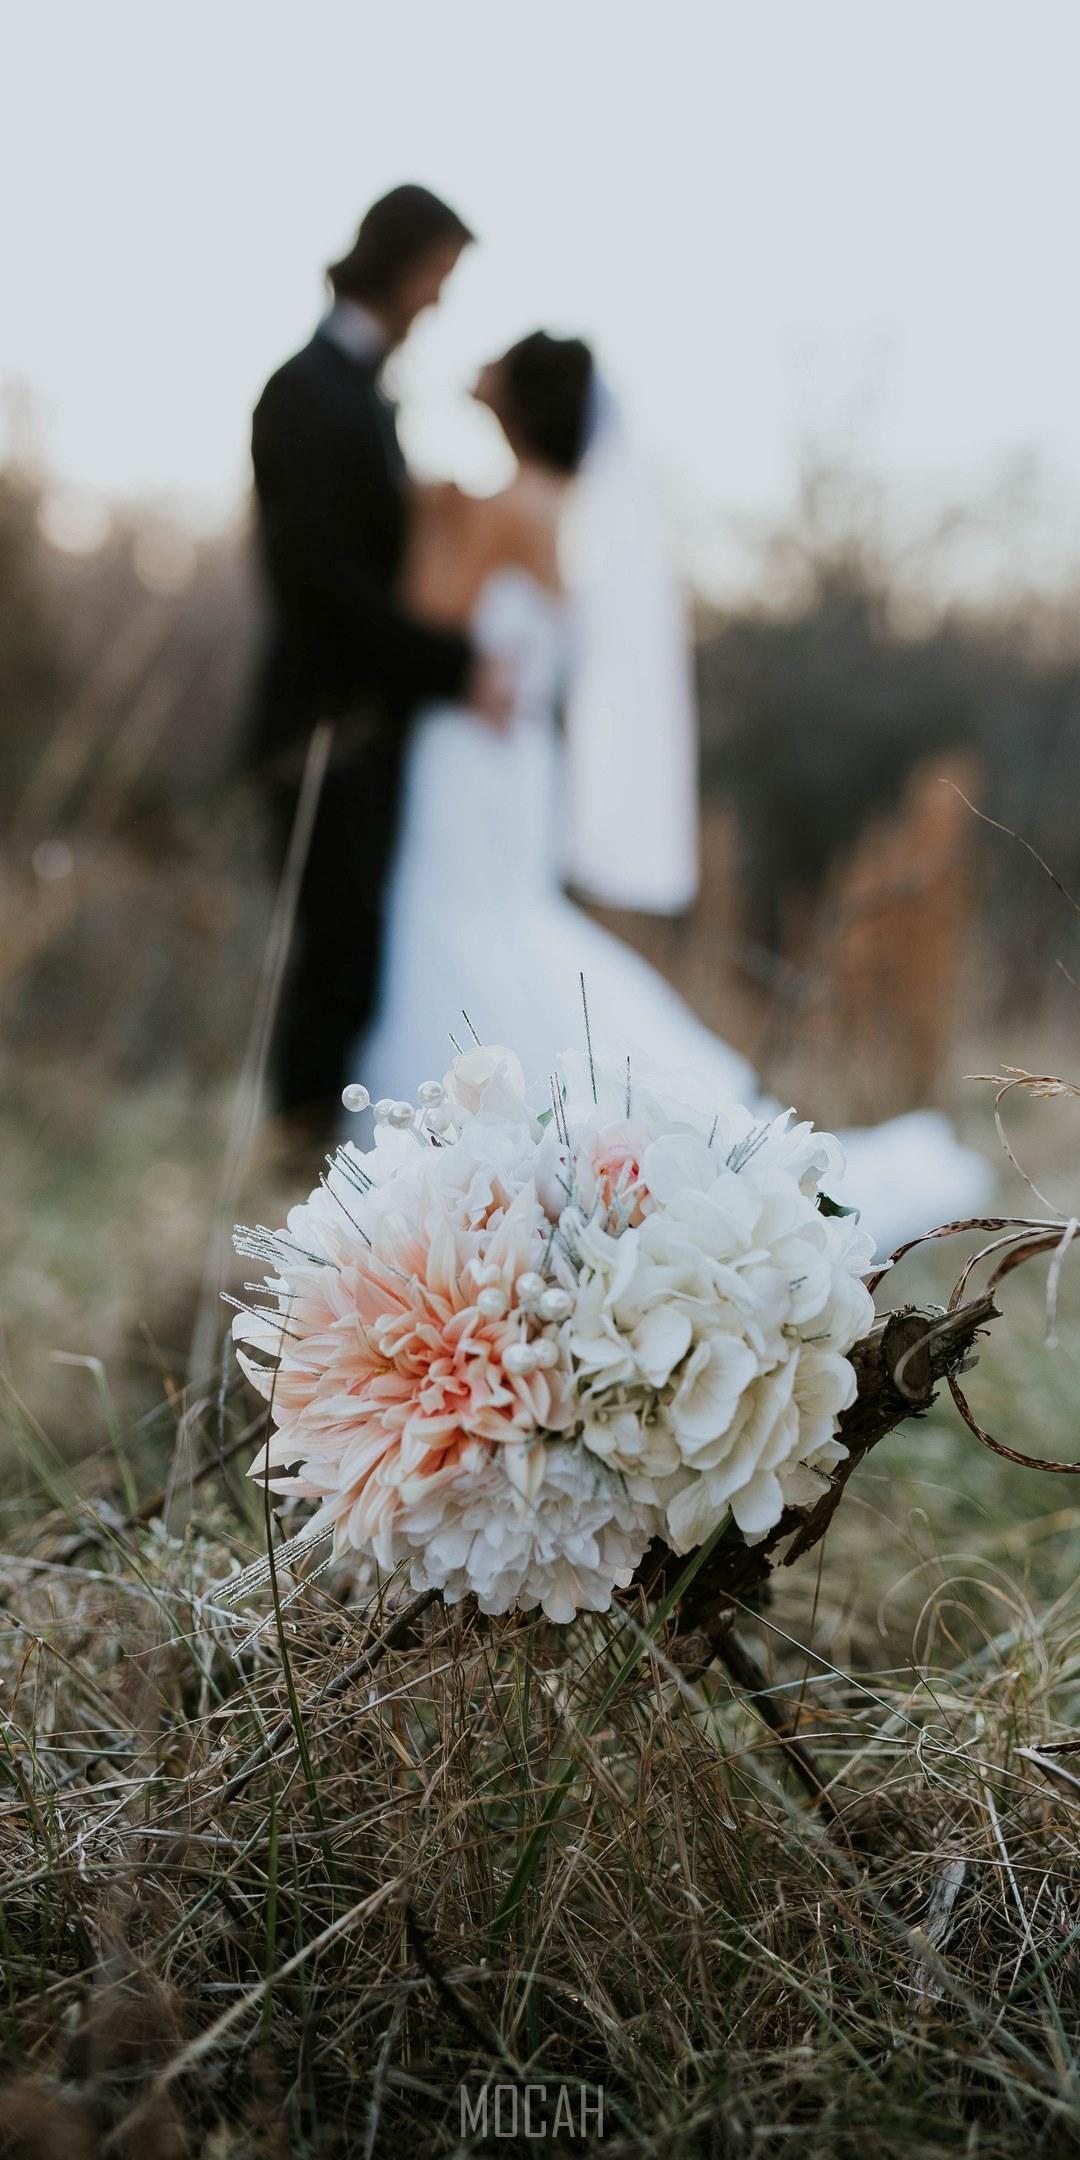 HD wallpaper, Wedding Evening, Motorola Moto Z3 Wallpaper Hd Download, 1080X2160, A Bouquet Sits In Tall Grass While A Married Couple Embraces In The Fuzzy Background